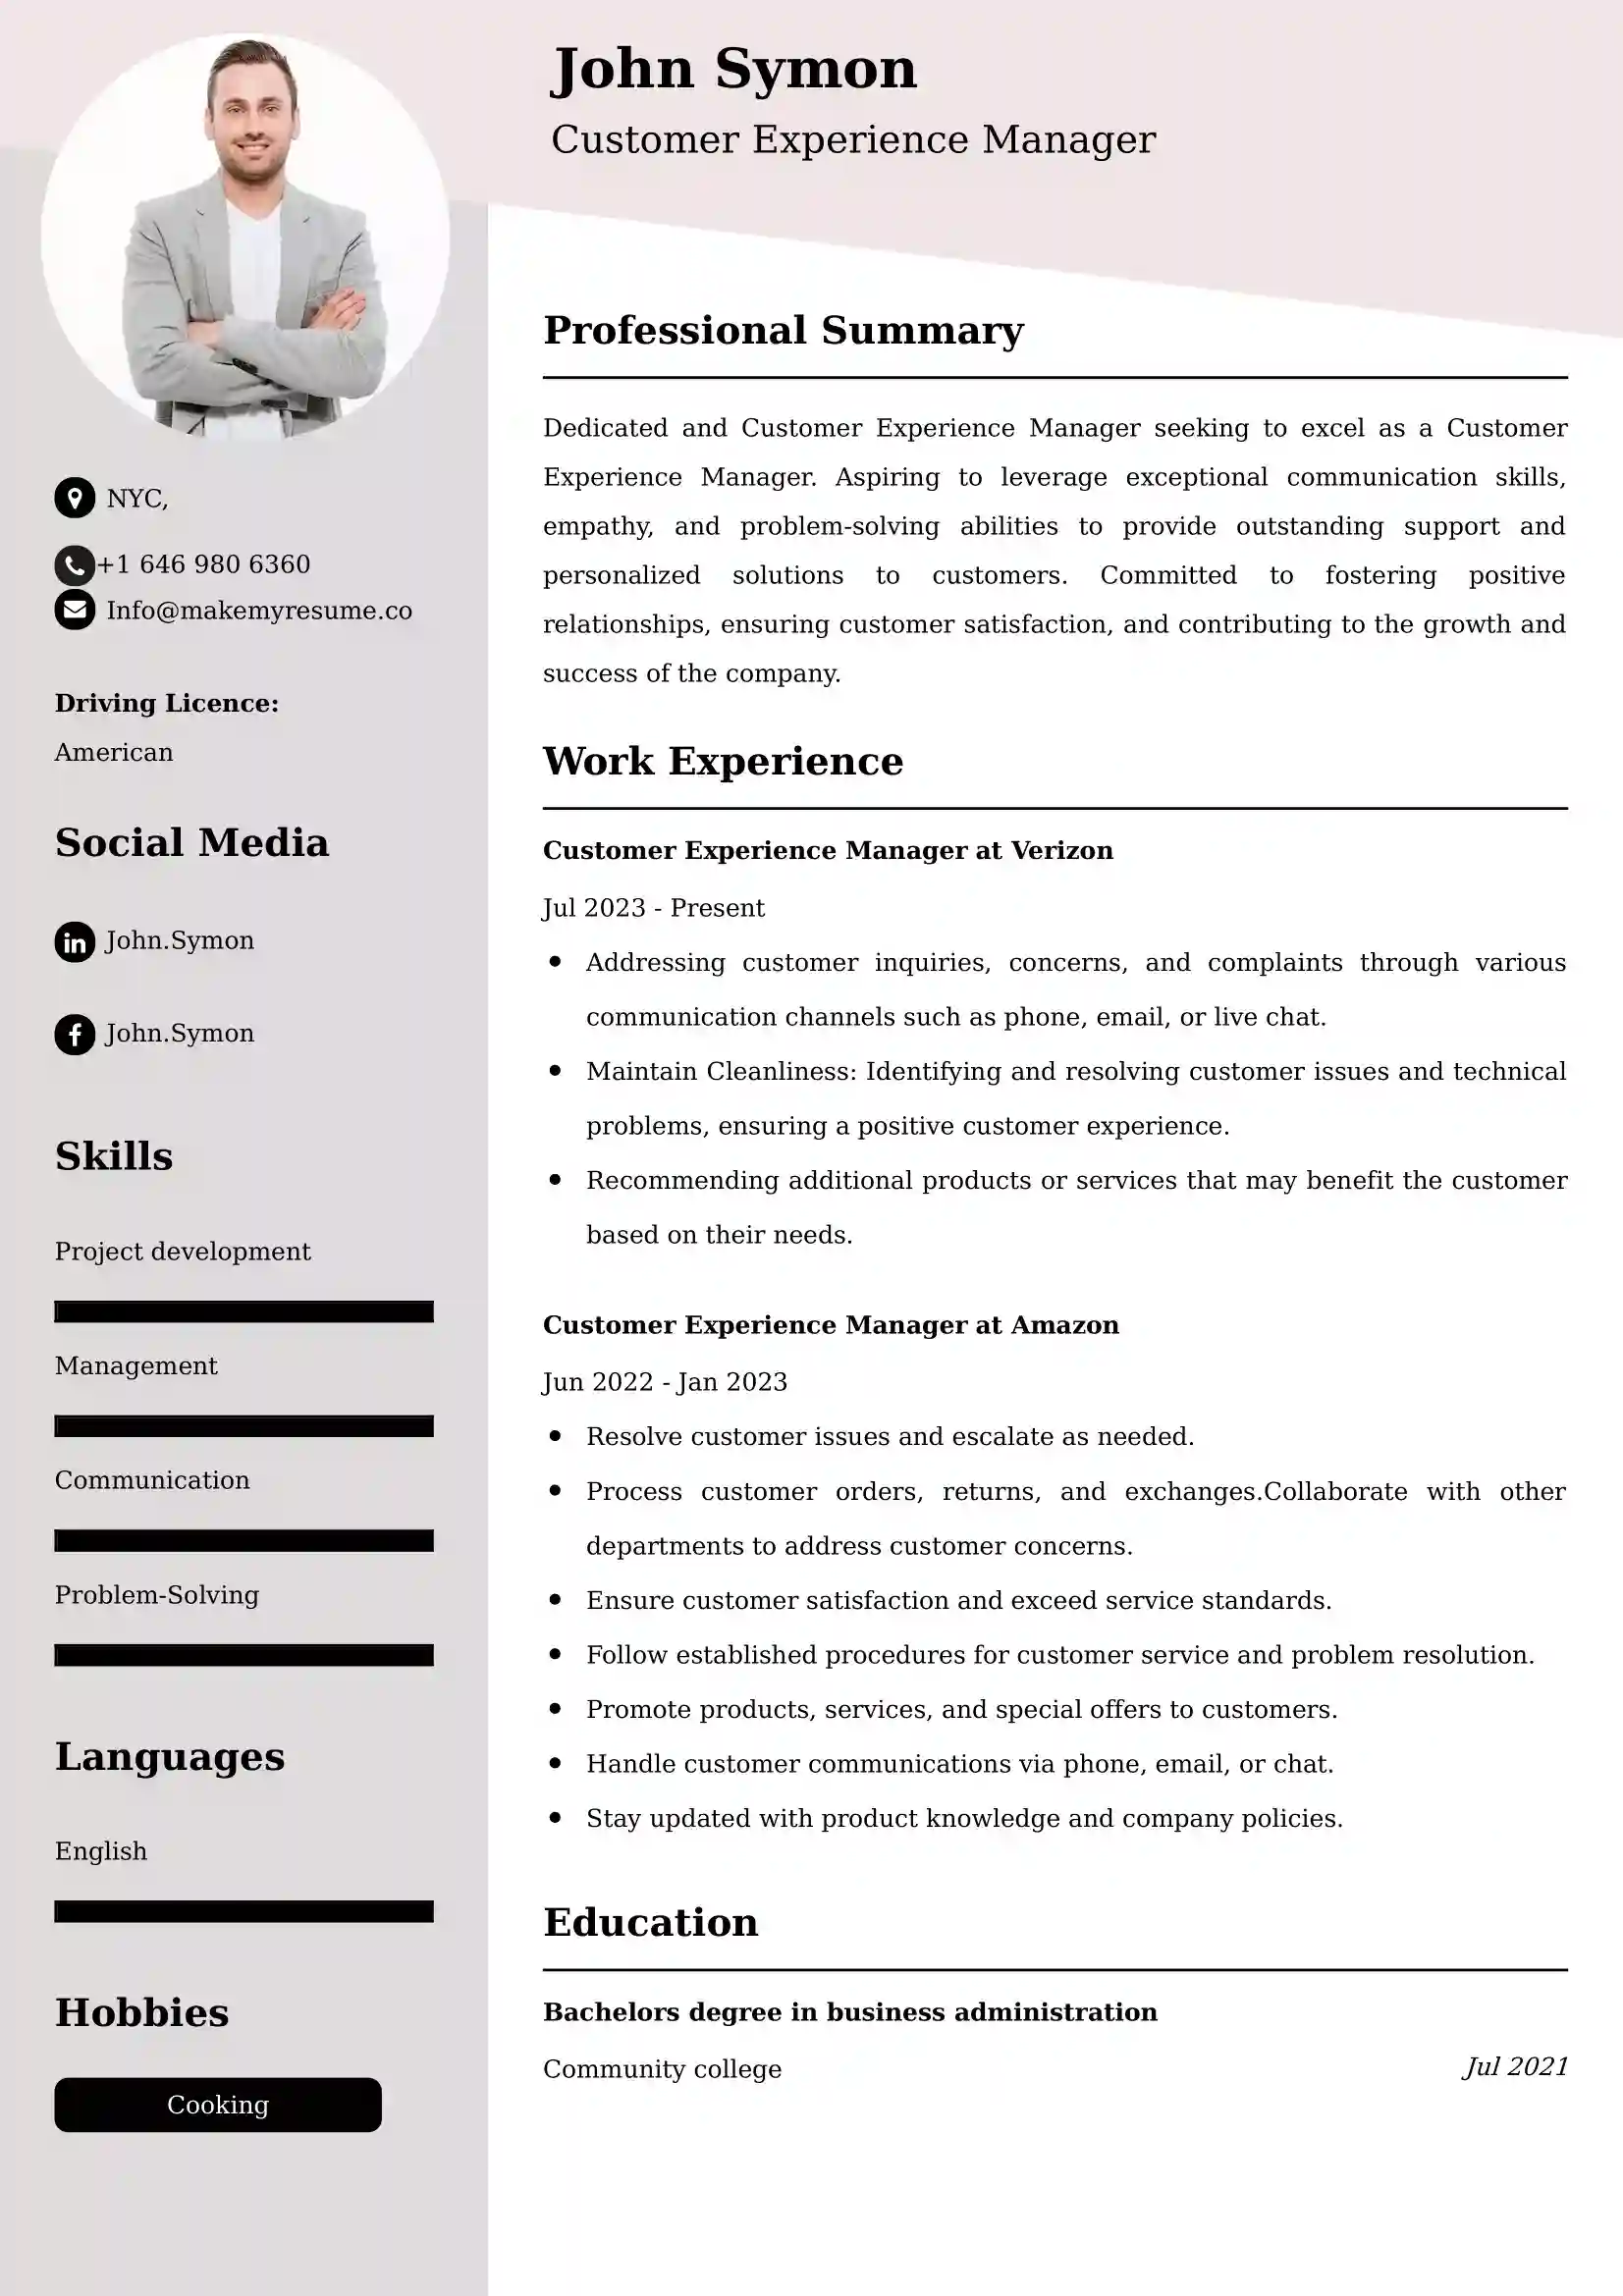 Customer Experience Manager Resume Examples - Australian Format and Tips